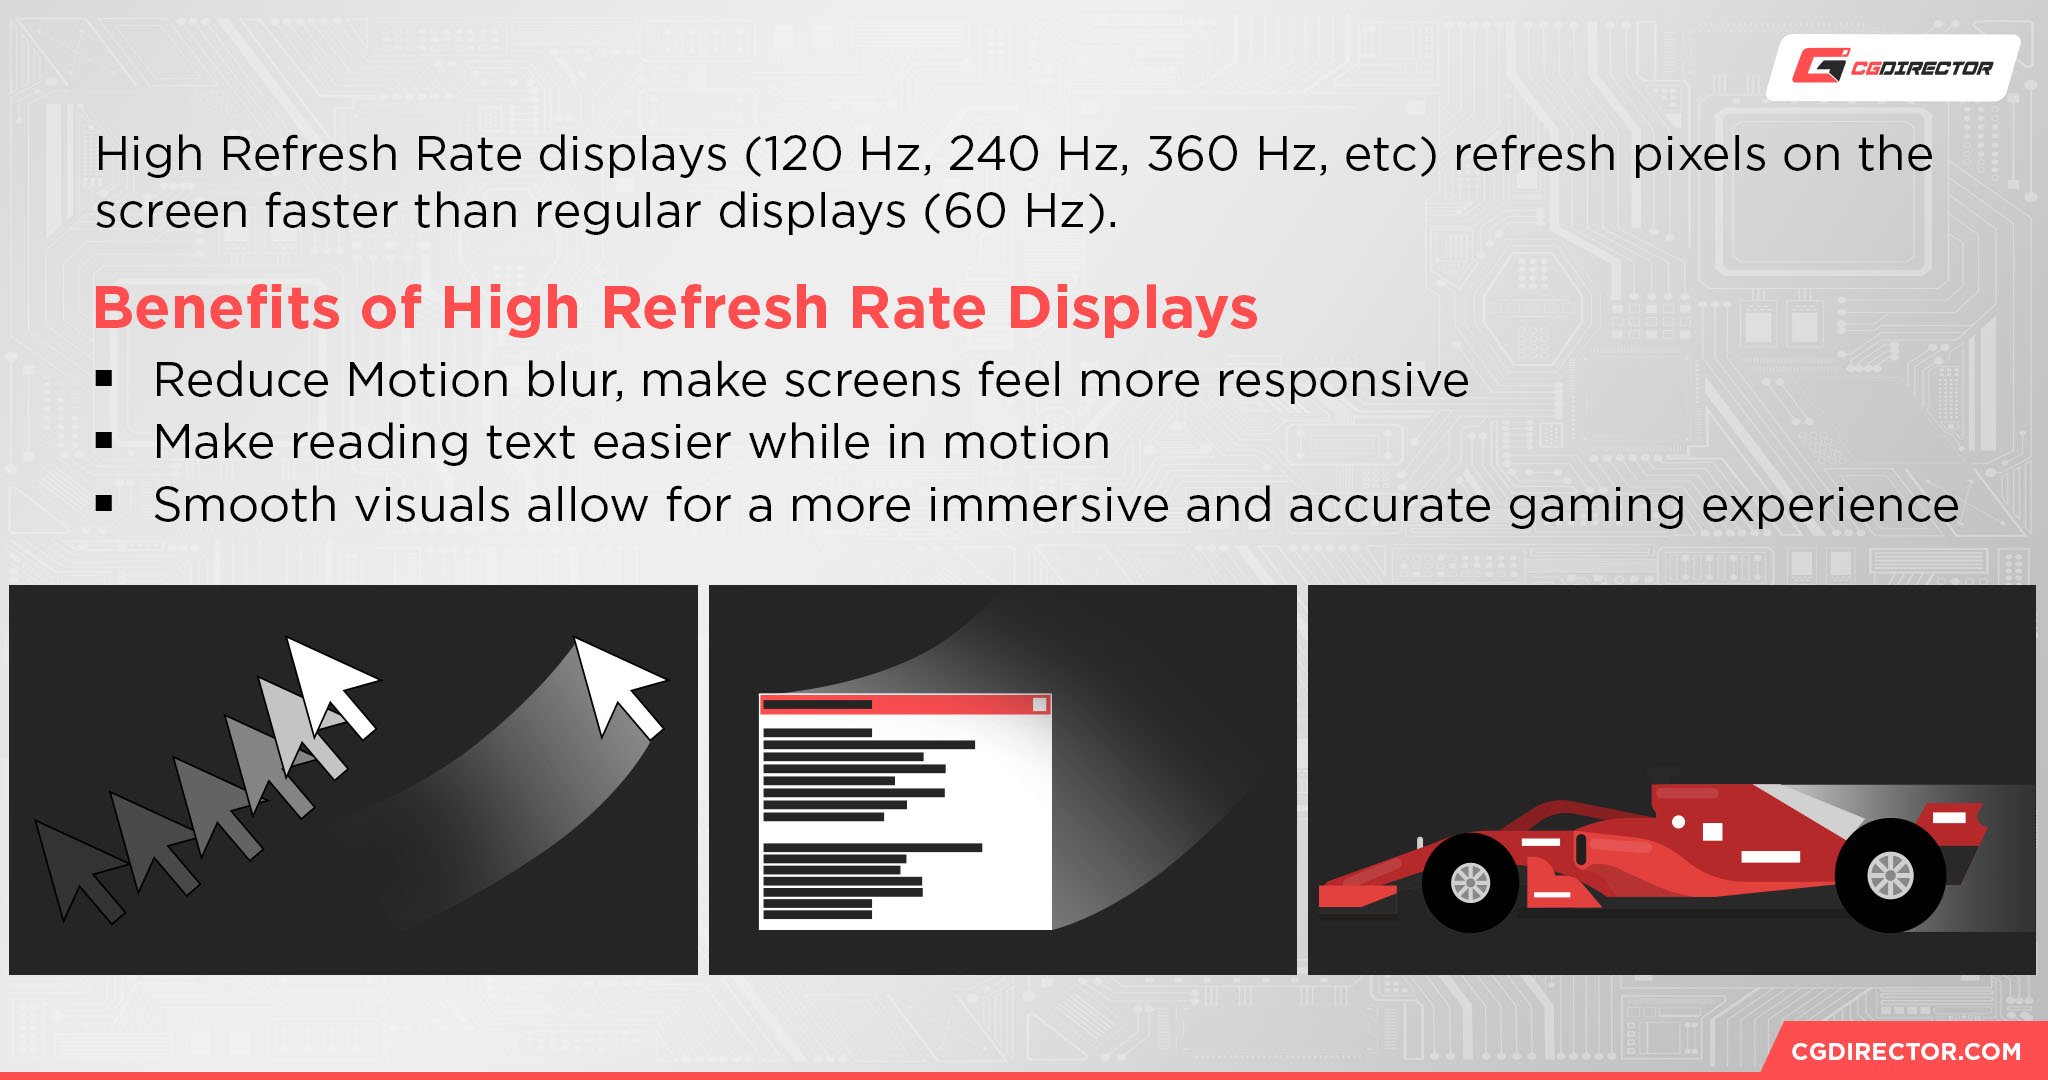 Benefits of High Refresh Rate Displays